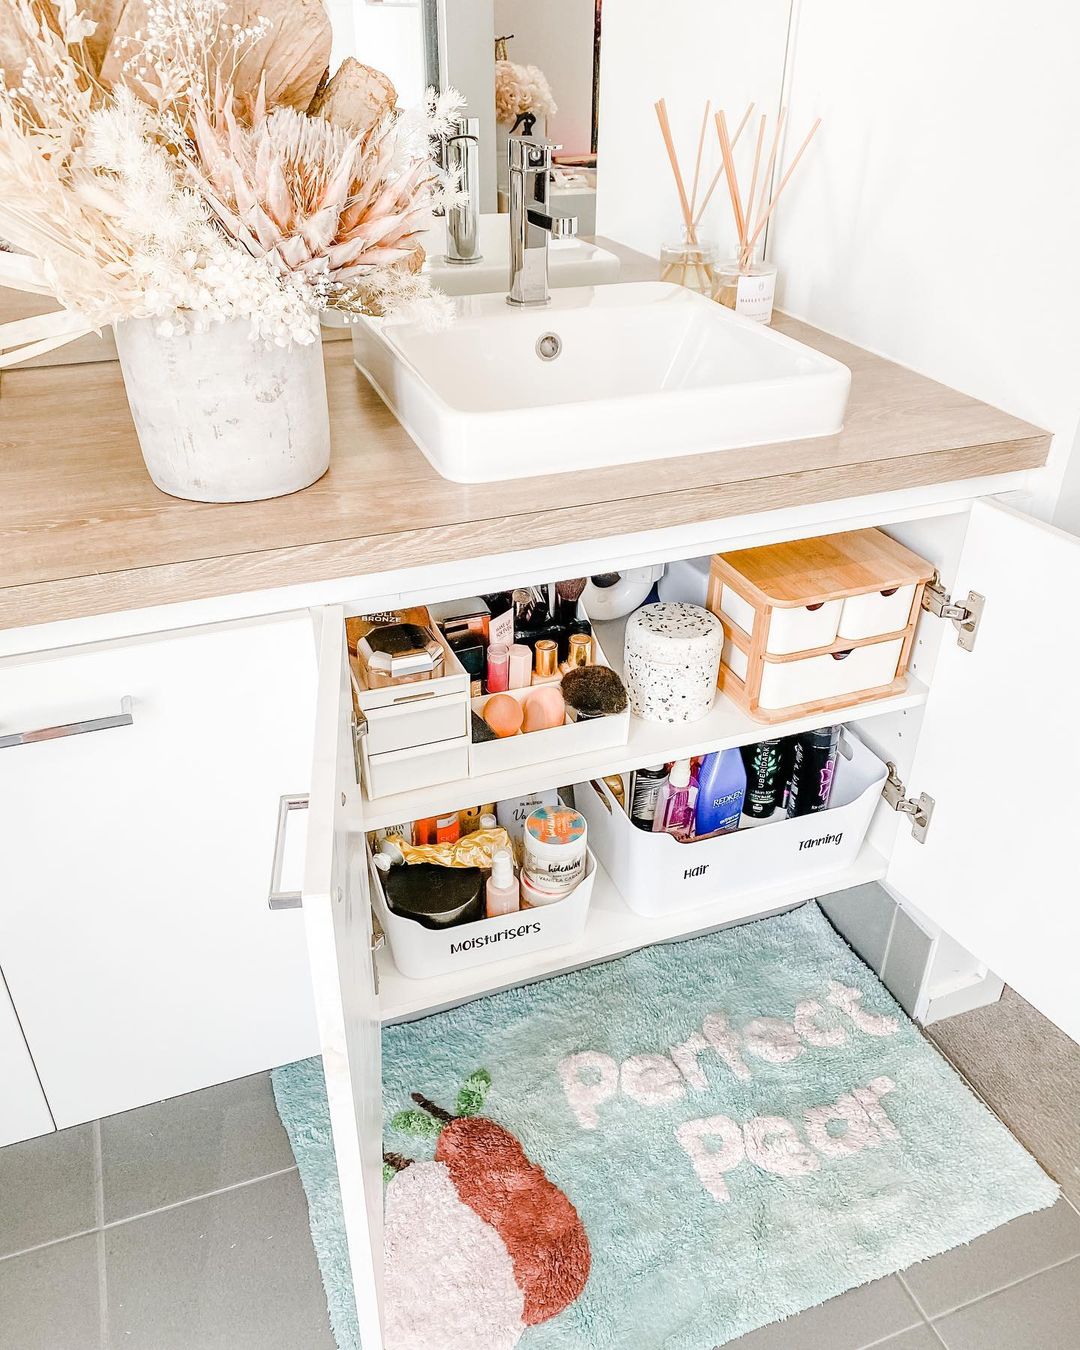 https://www.extraspace.com/blog/wp-content/uploads/2021/03/How-to-Spring-Clean-Your-Bathroom-Cabinets-Drawers.jpg